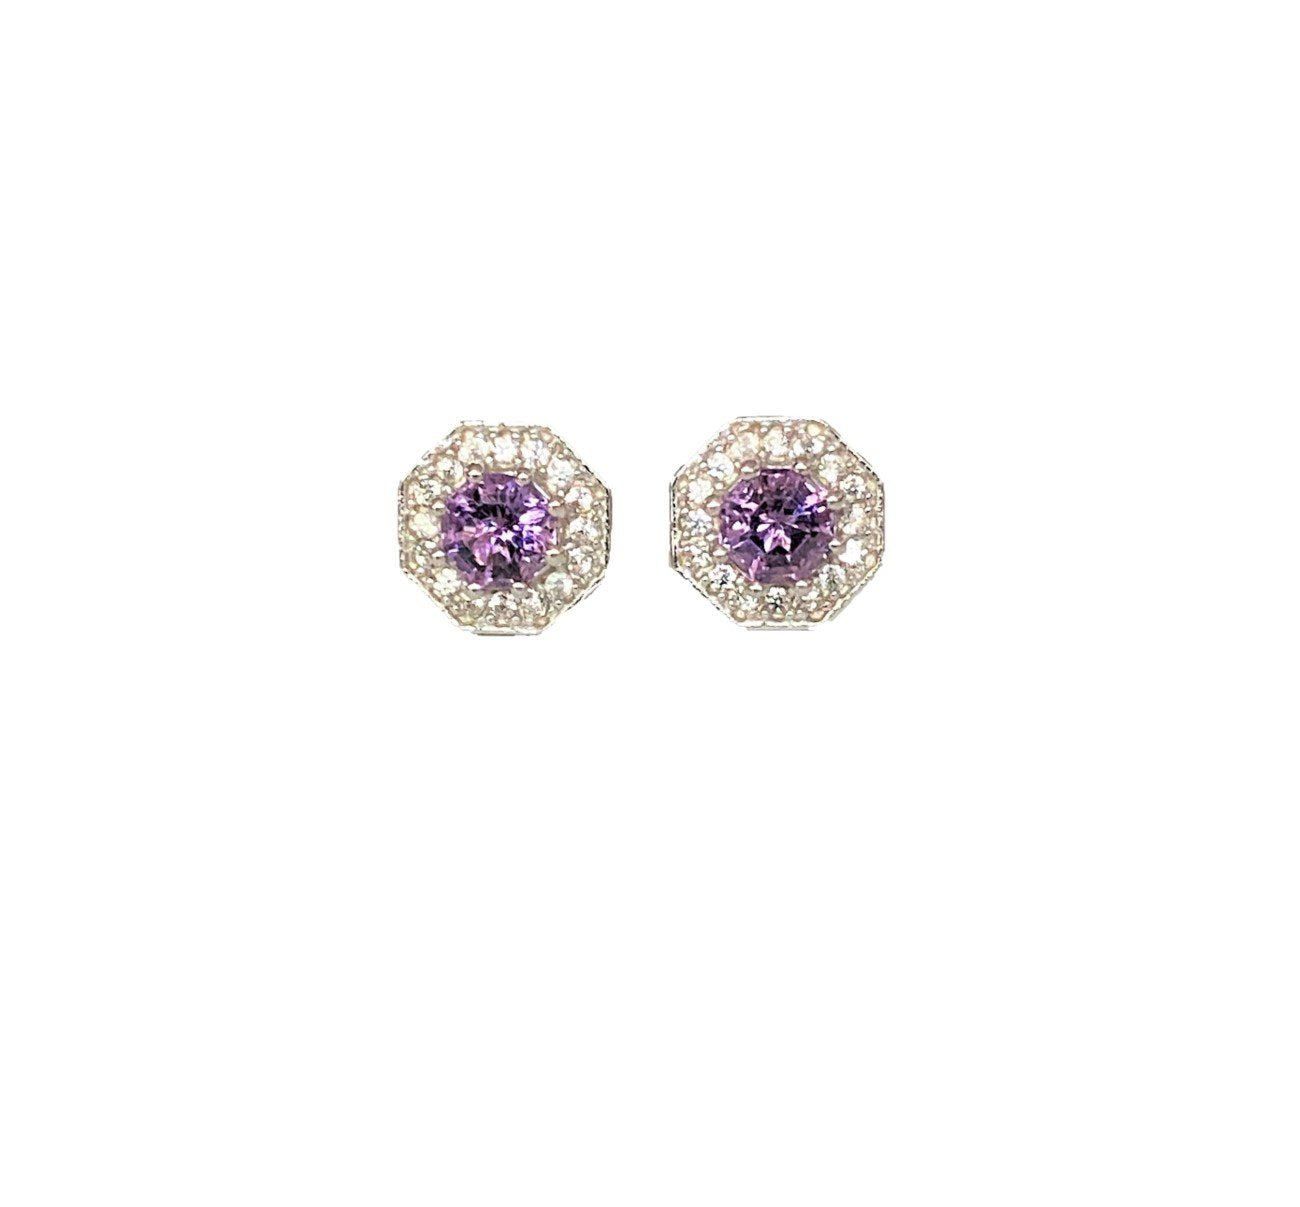 2.5ct. Amethyst & Natural White Zircon Halo Stud Earrings, Sterling Silver February birthstone fine jewelry gift for women